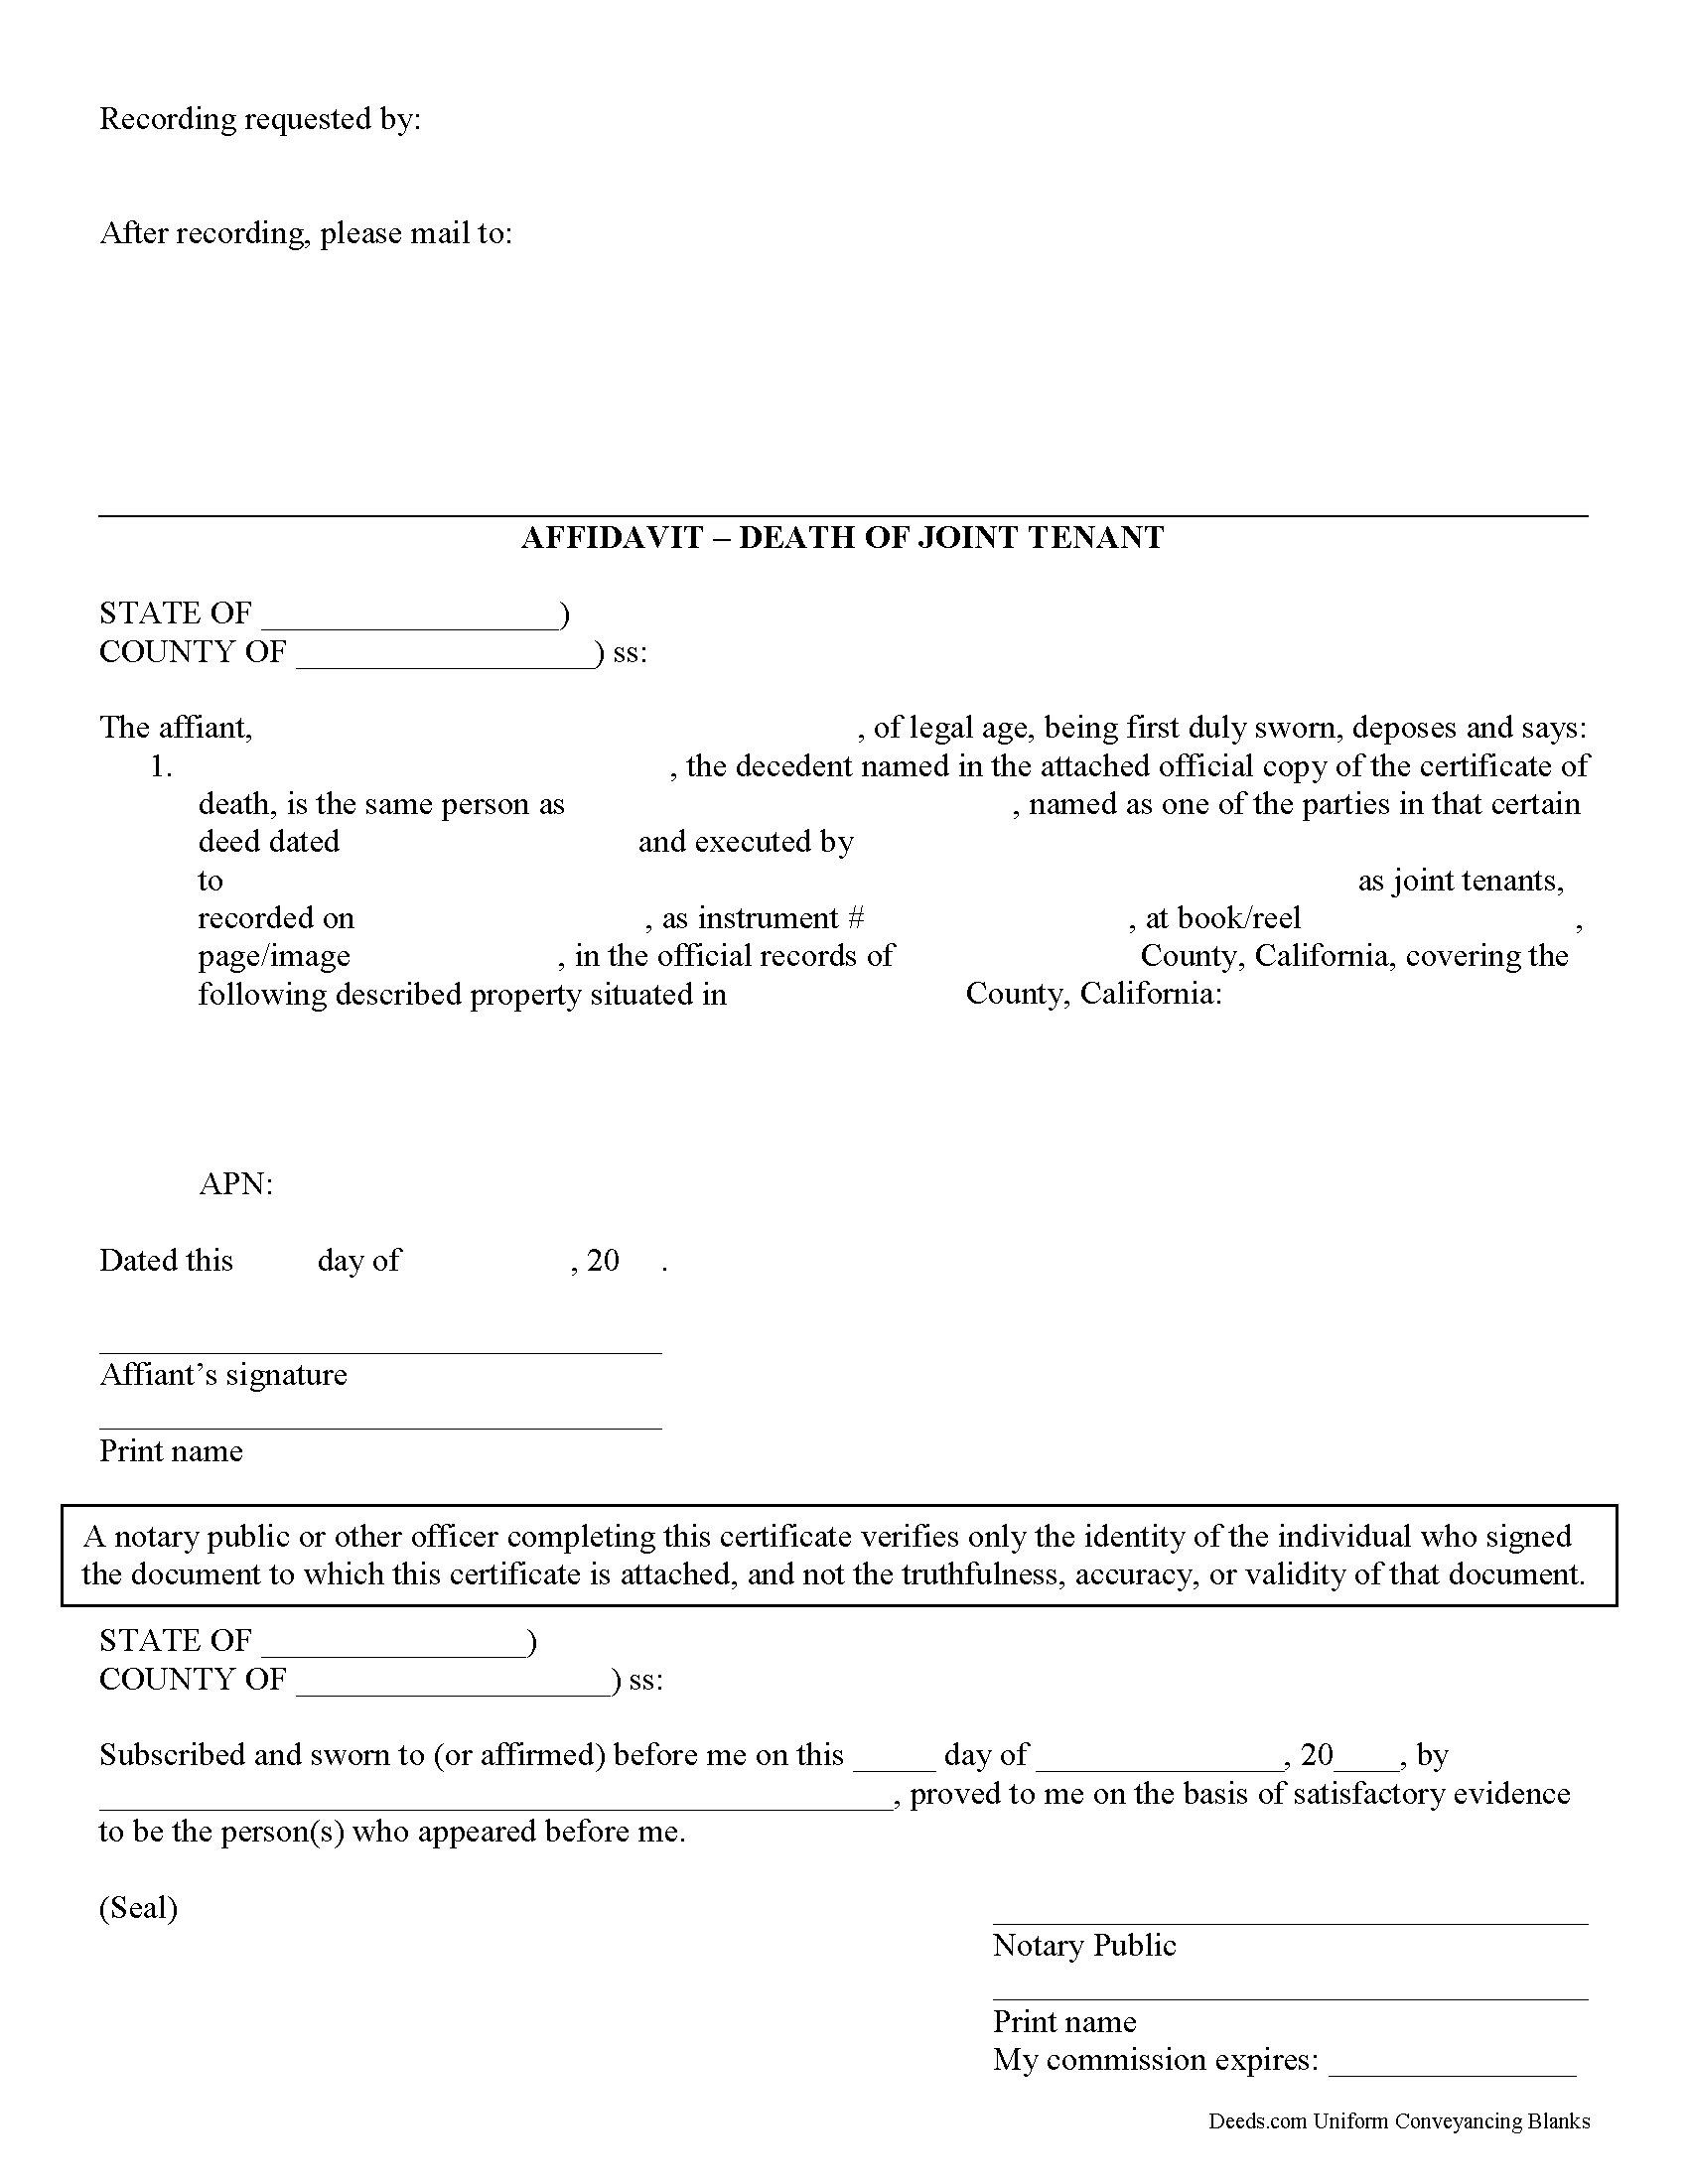 Affidavit of Death of a Joint Tenant Form